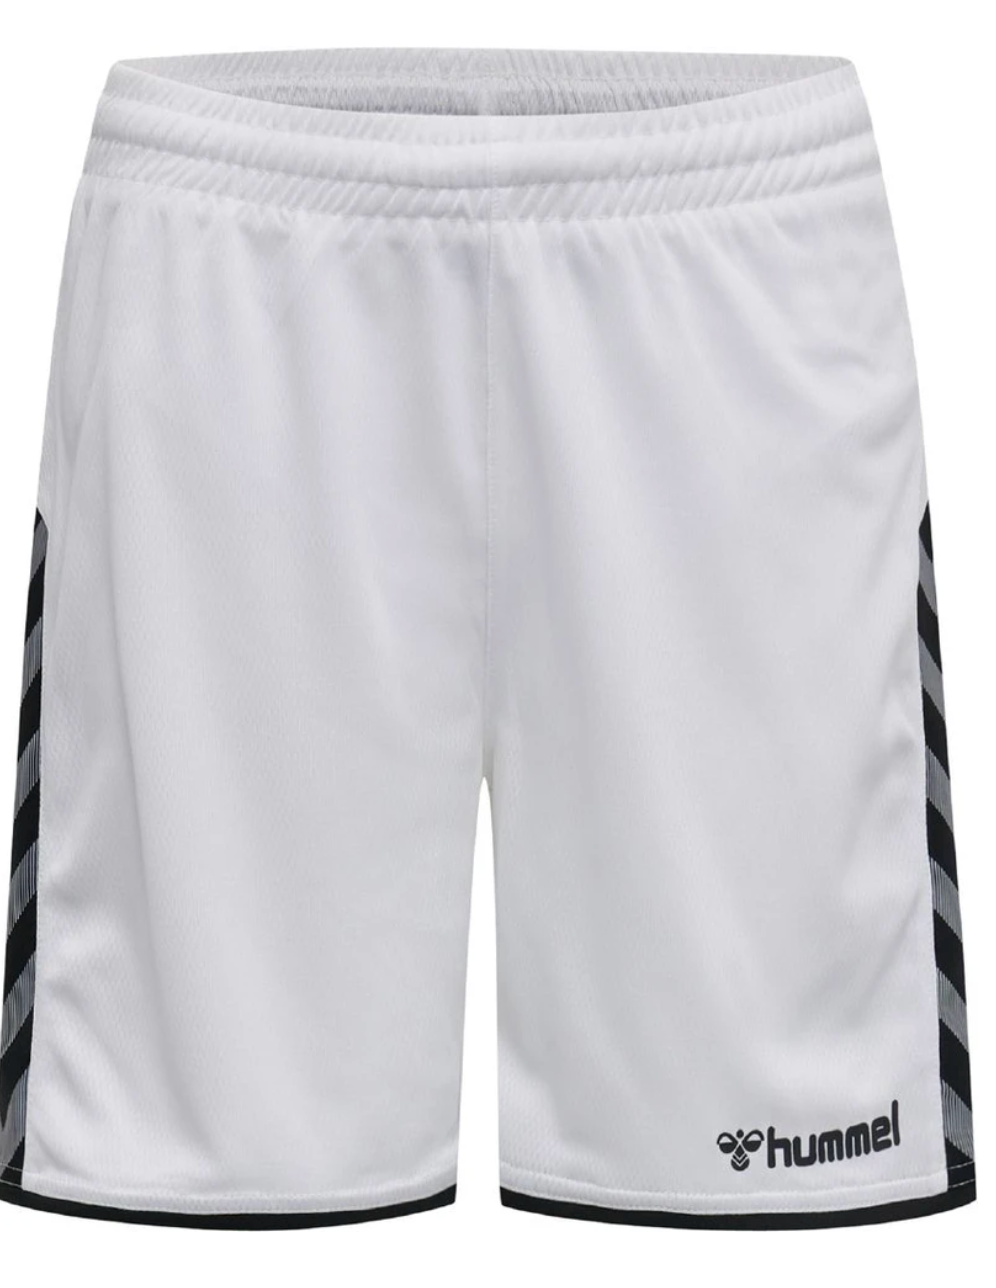 Hummel HML Authentic Poly YOUTH Short-White/Black